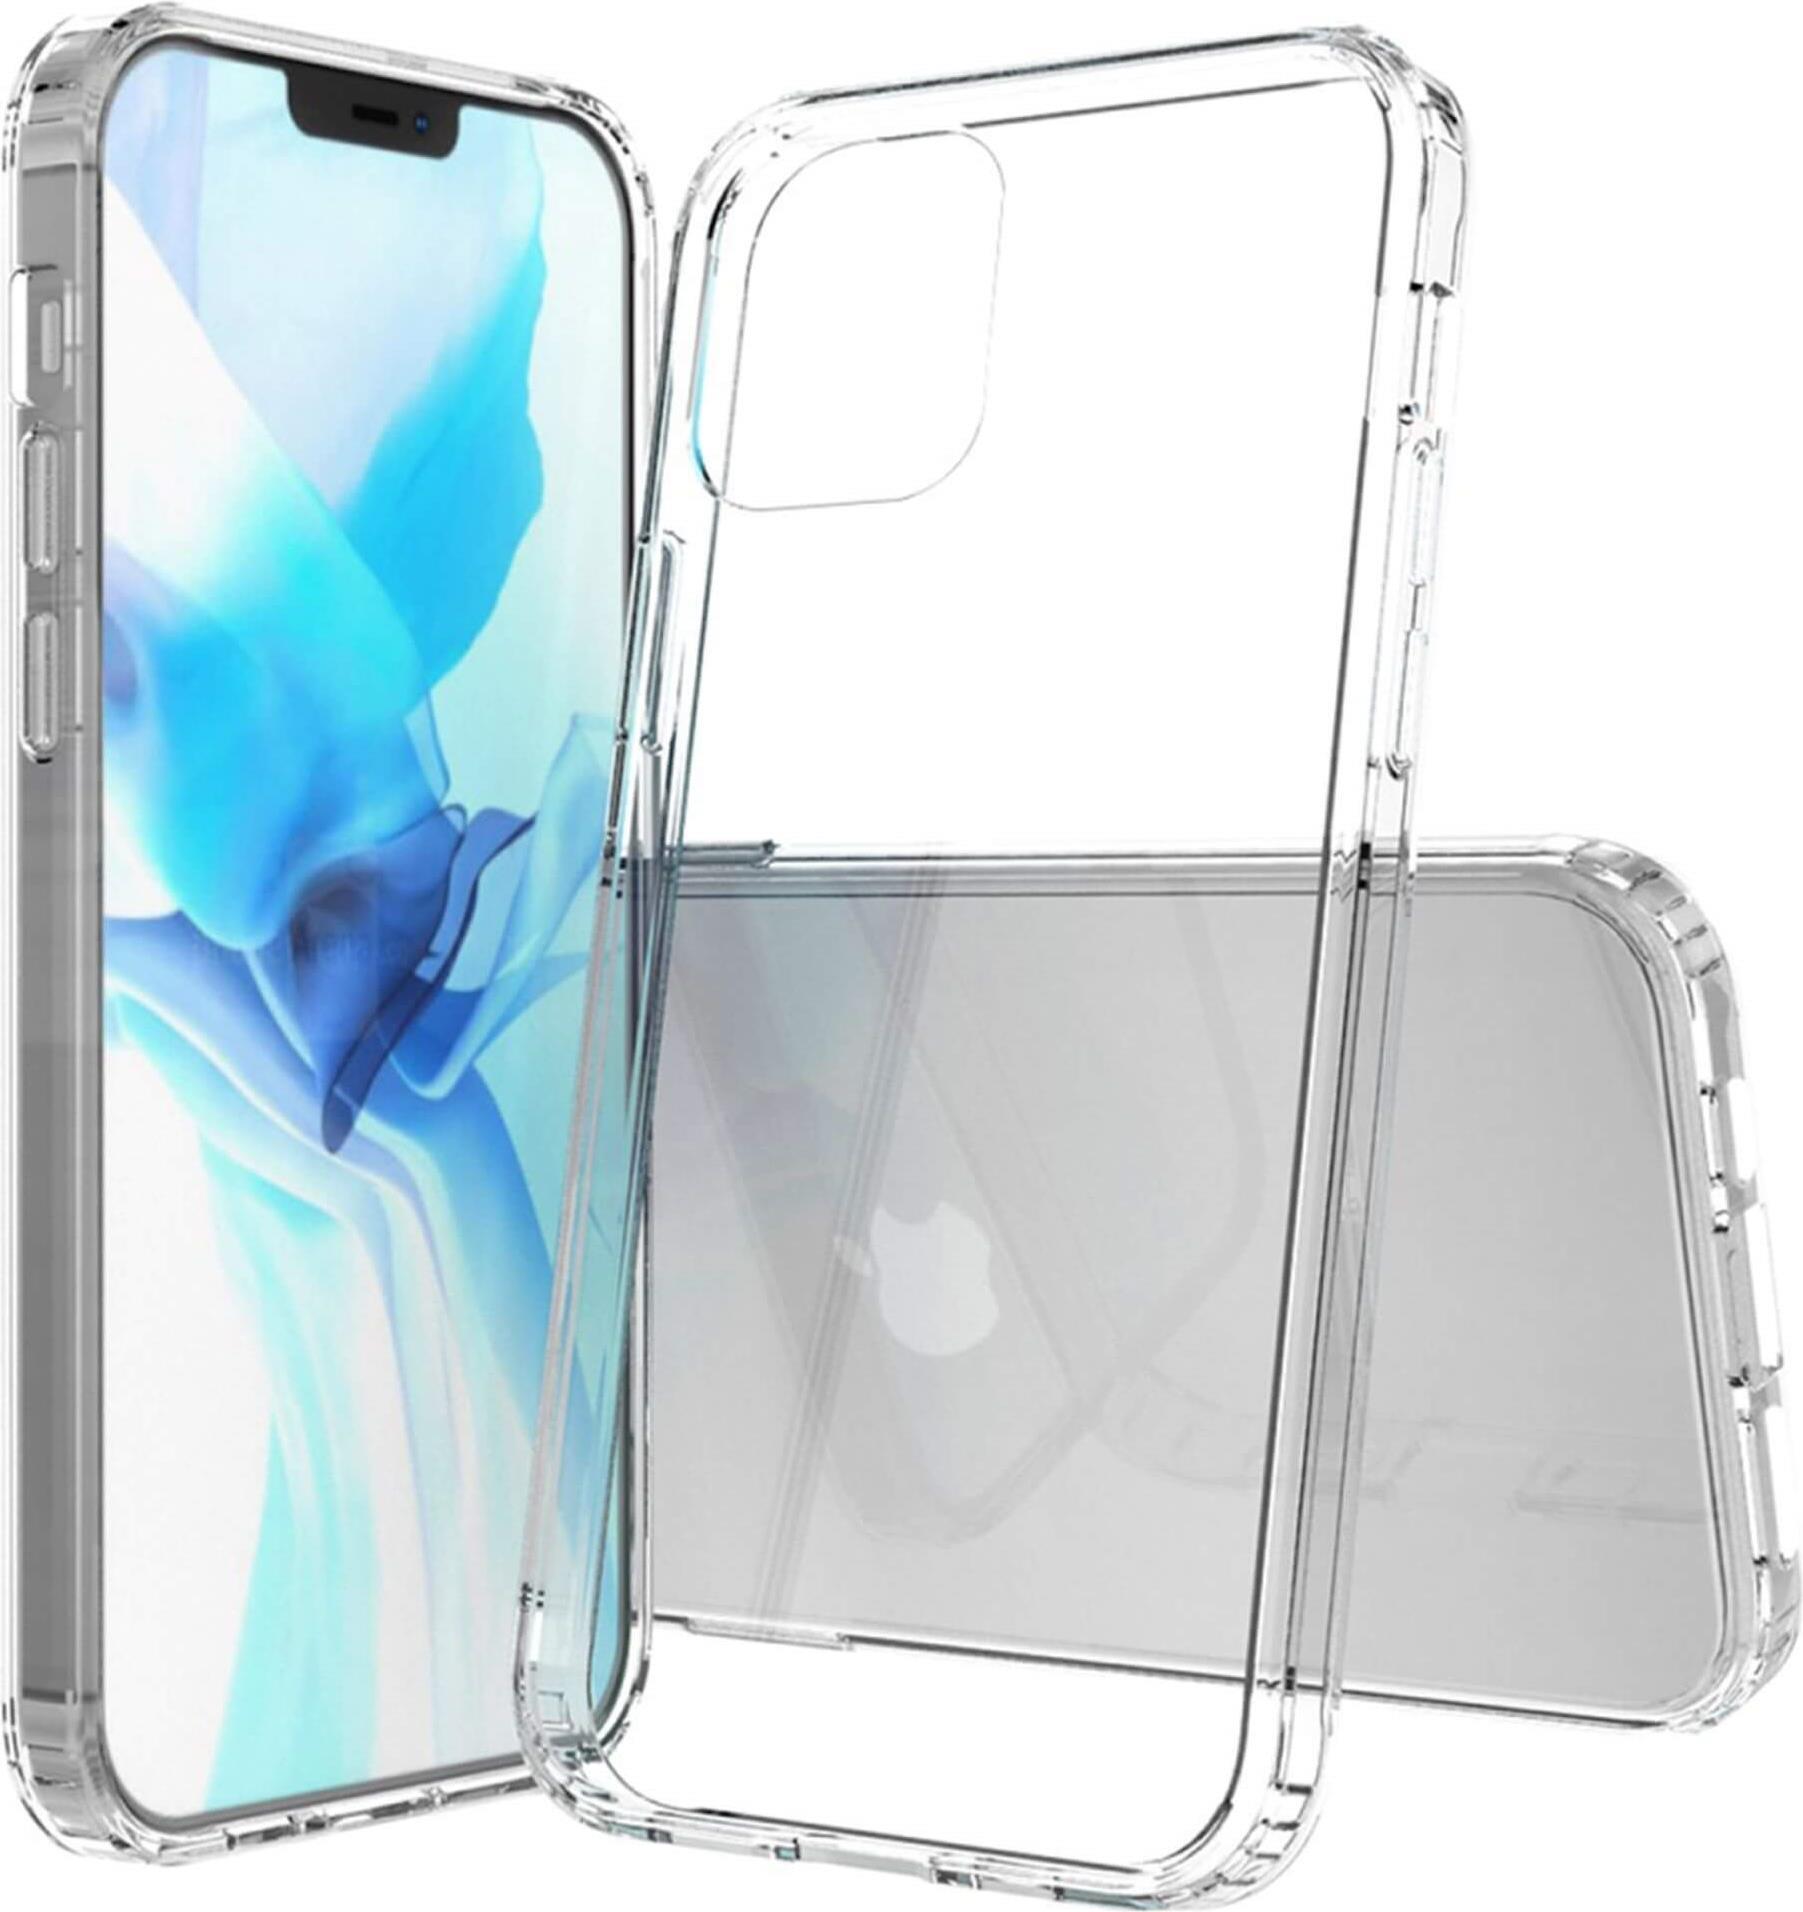 grotop JT BackCase Pankow Clear für NEW iPhone 6.7, Transparent (10693)